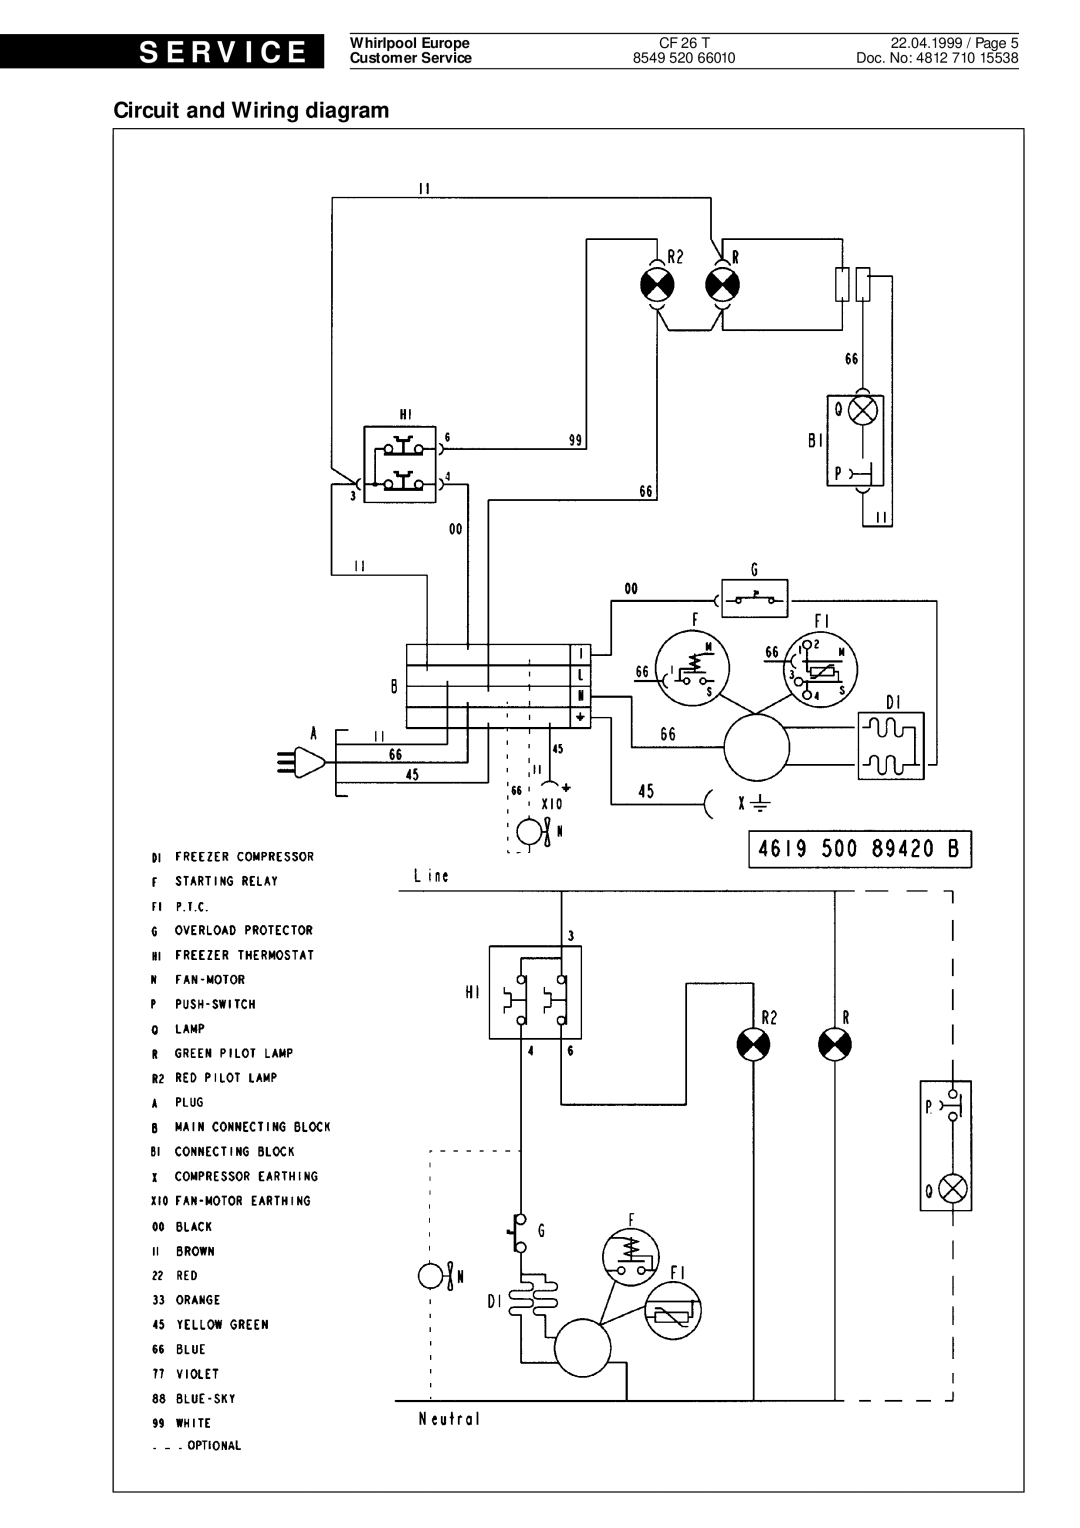 Whirlpool CF 26 T Circuit and Wiring diagram, S E R V I C E, Whirlpool Europe, Customer Service, 22.04.1999 / Page 